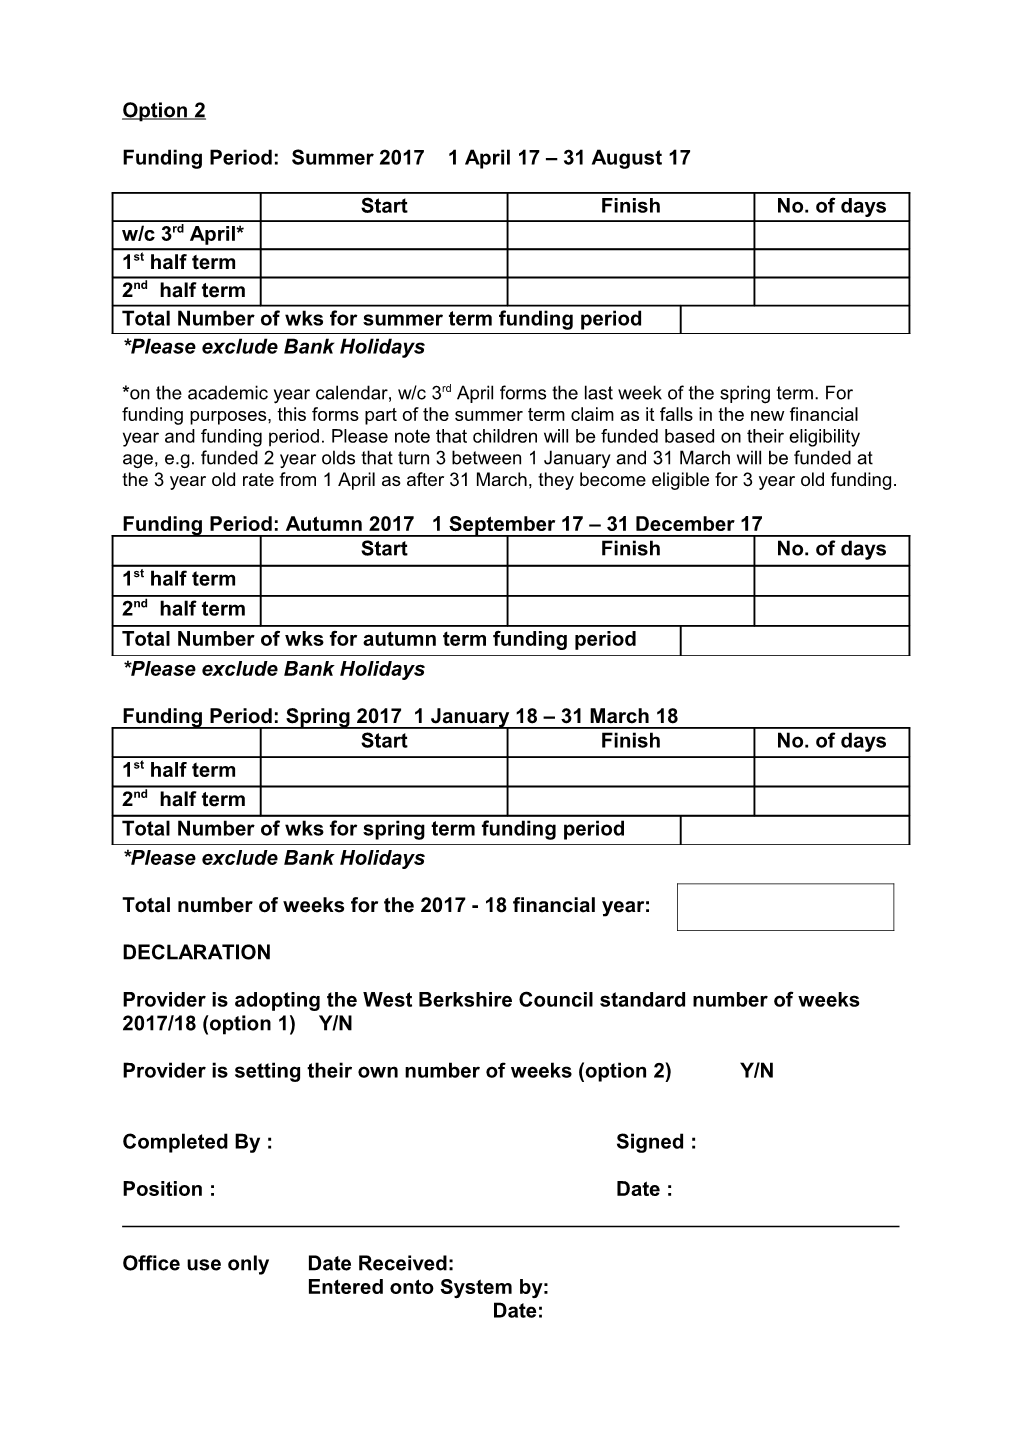 Please Complete This Form and Return to the Early Years Service Team